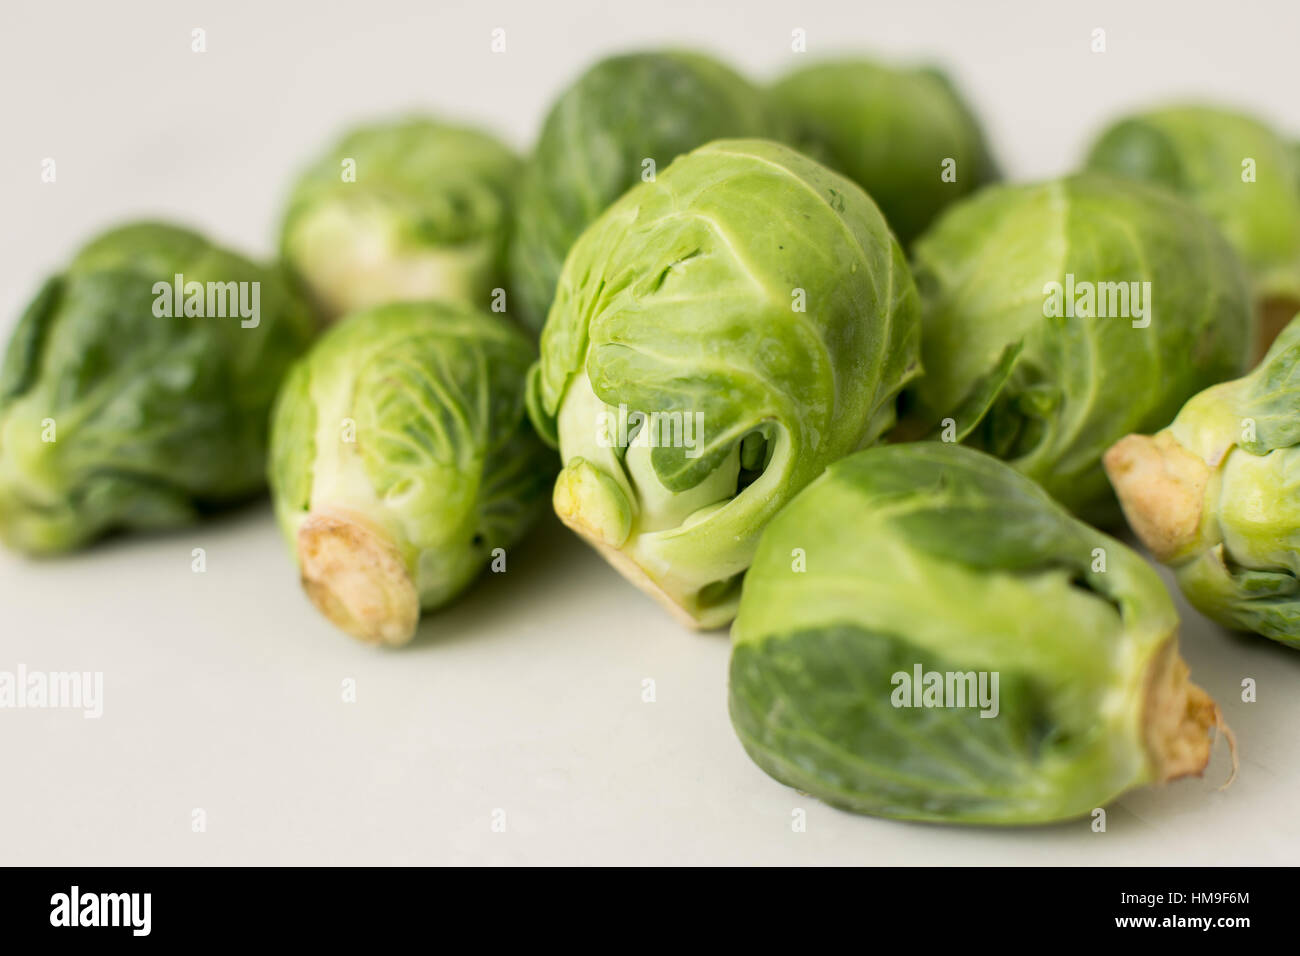 a close-up angle on a pile of organic brussels sprouts on a white table Stock Photo